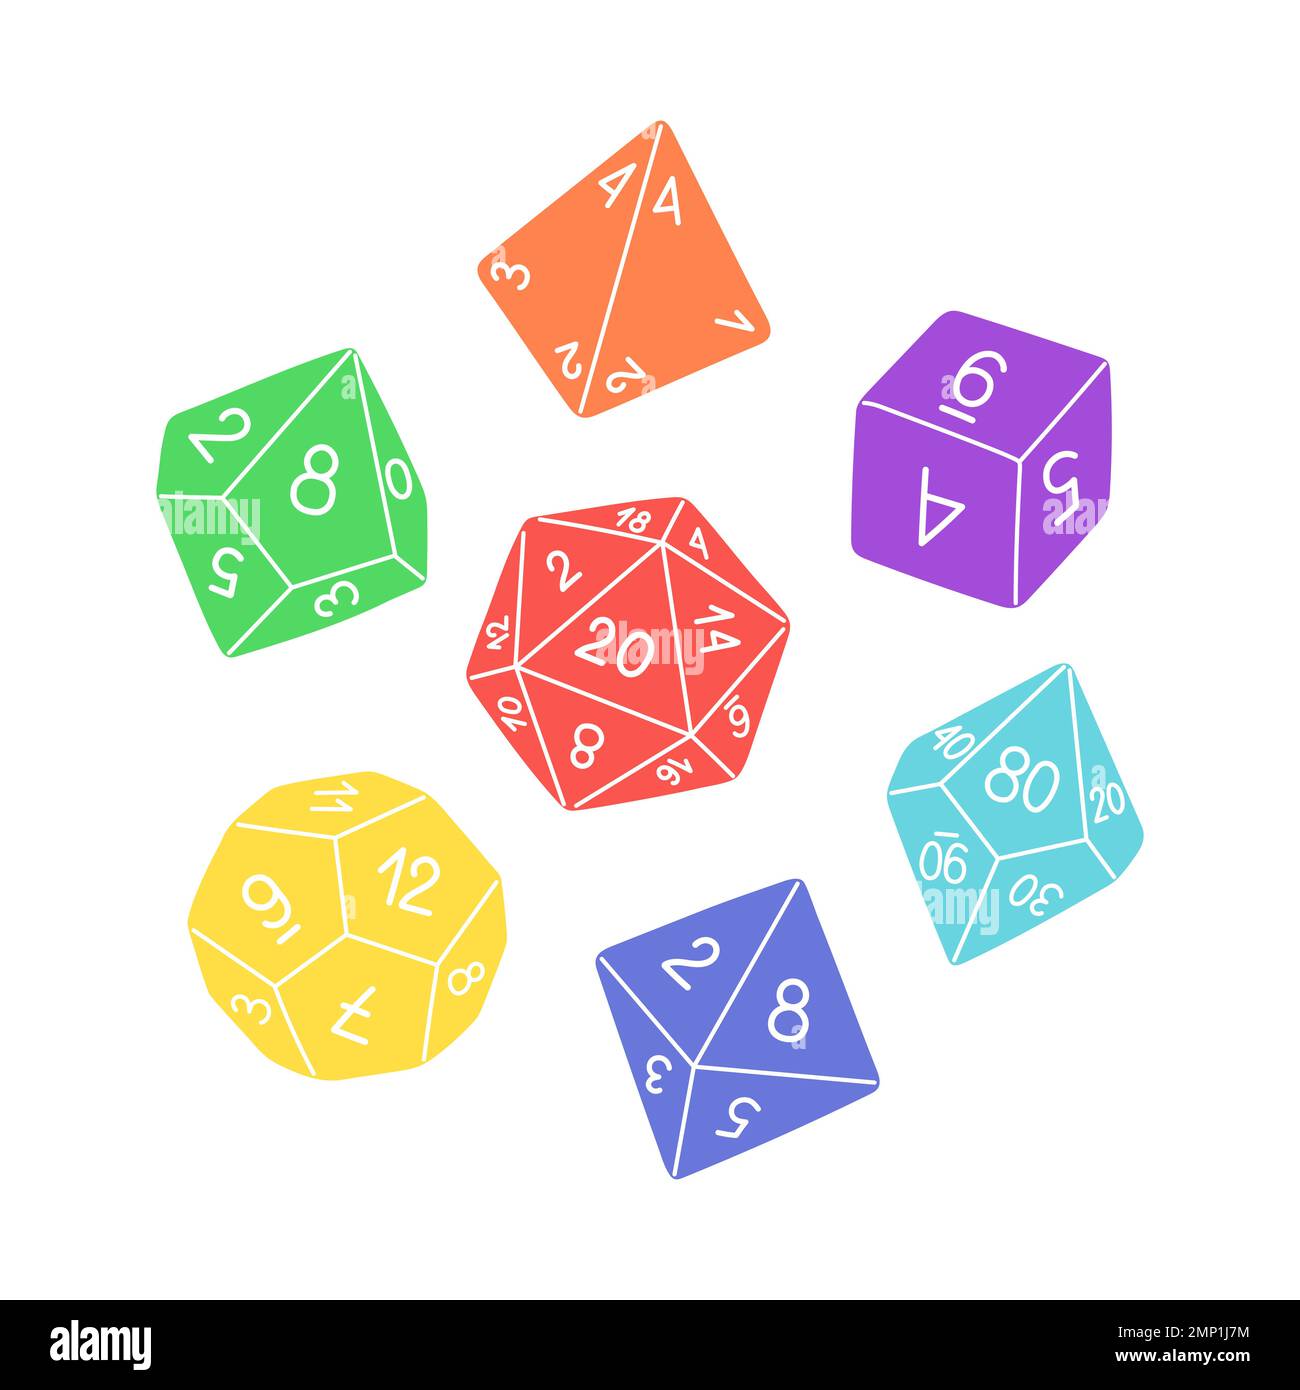 File:D20 icon.png - Wikimedia Commons